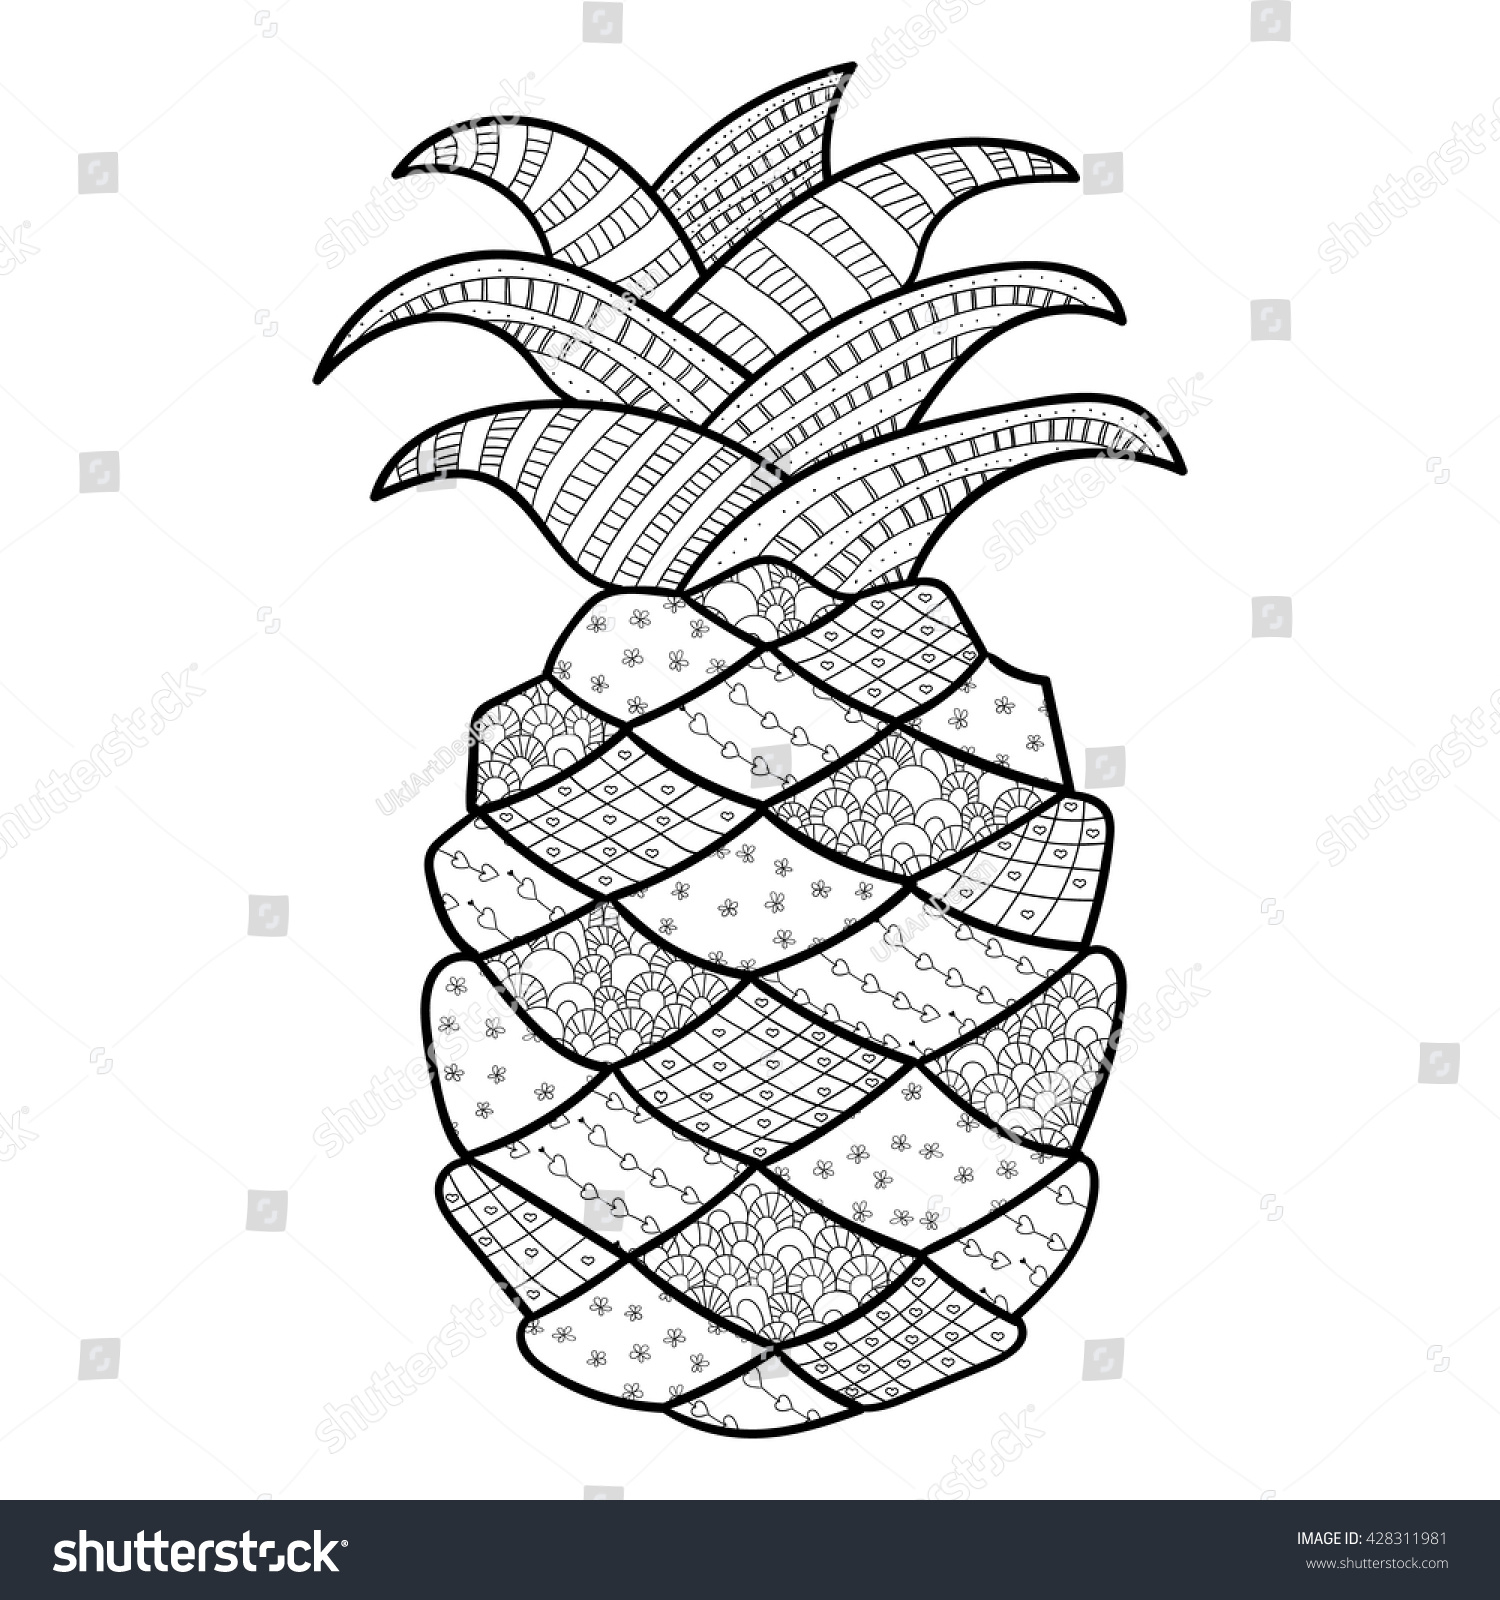 Adult coloring page cute pineapple vector stock vector royalty free